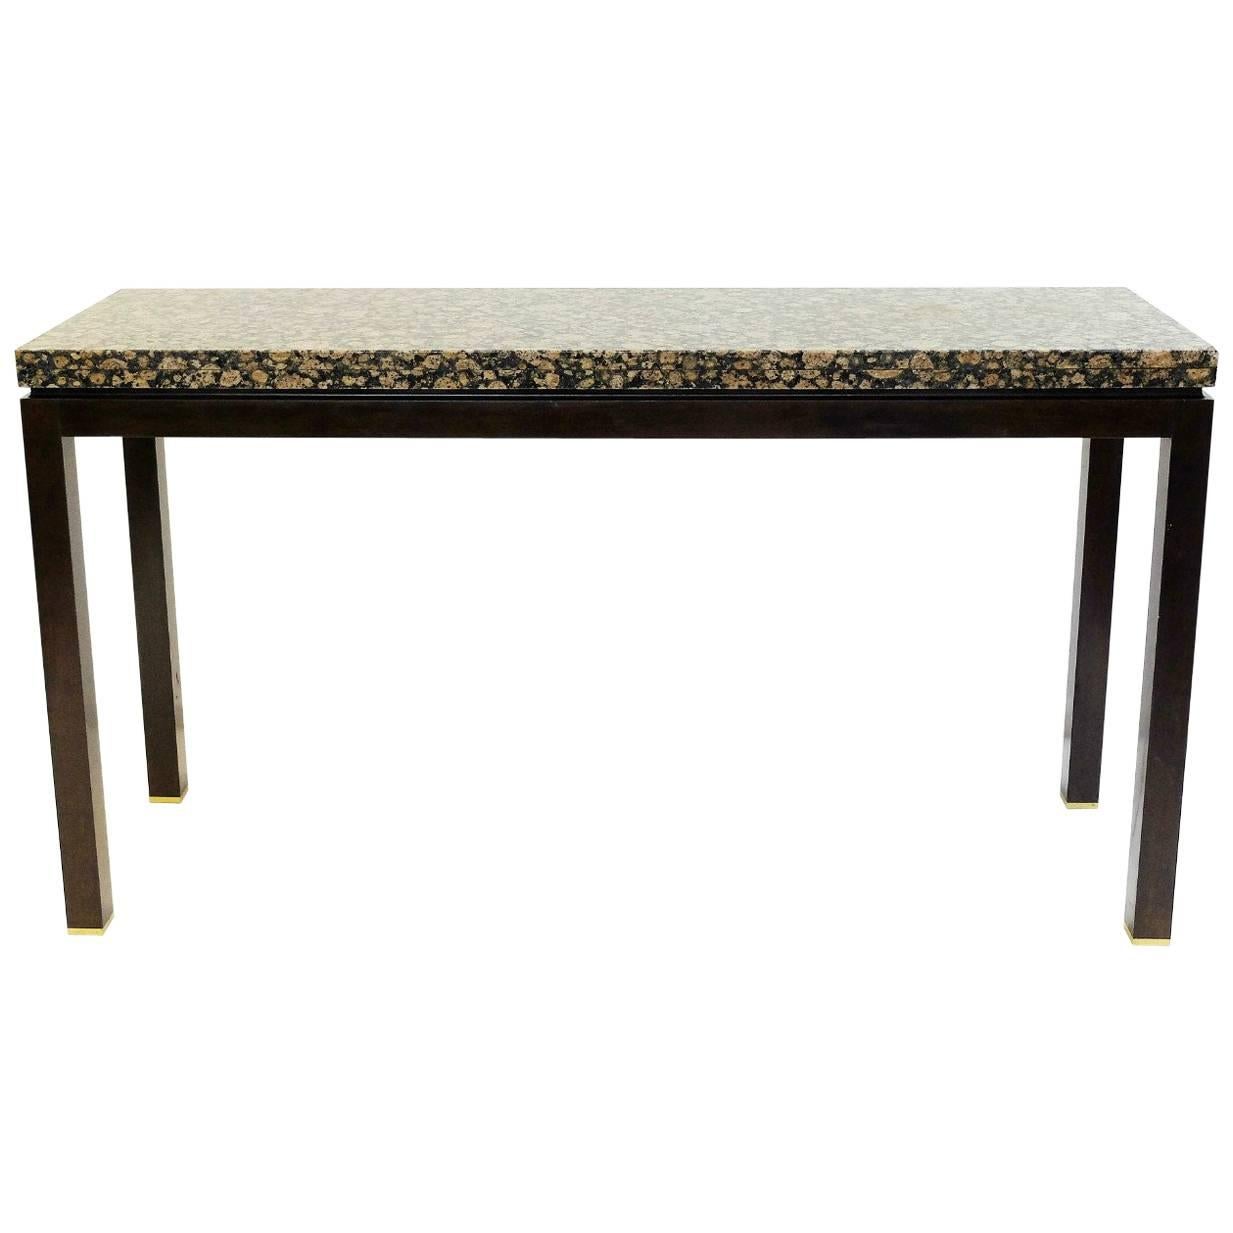 Granite and Wood Console Attributed to E. J. Wormley for Dunbar